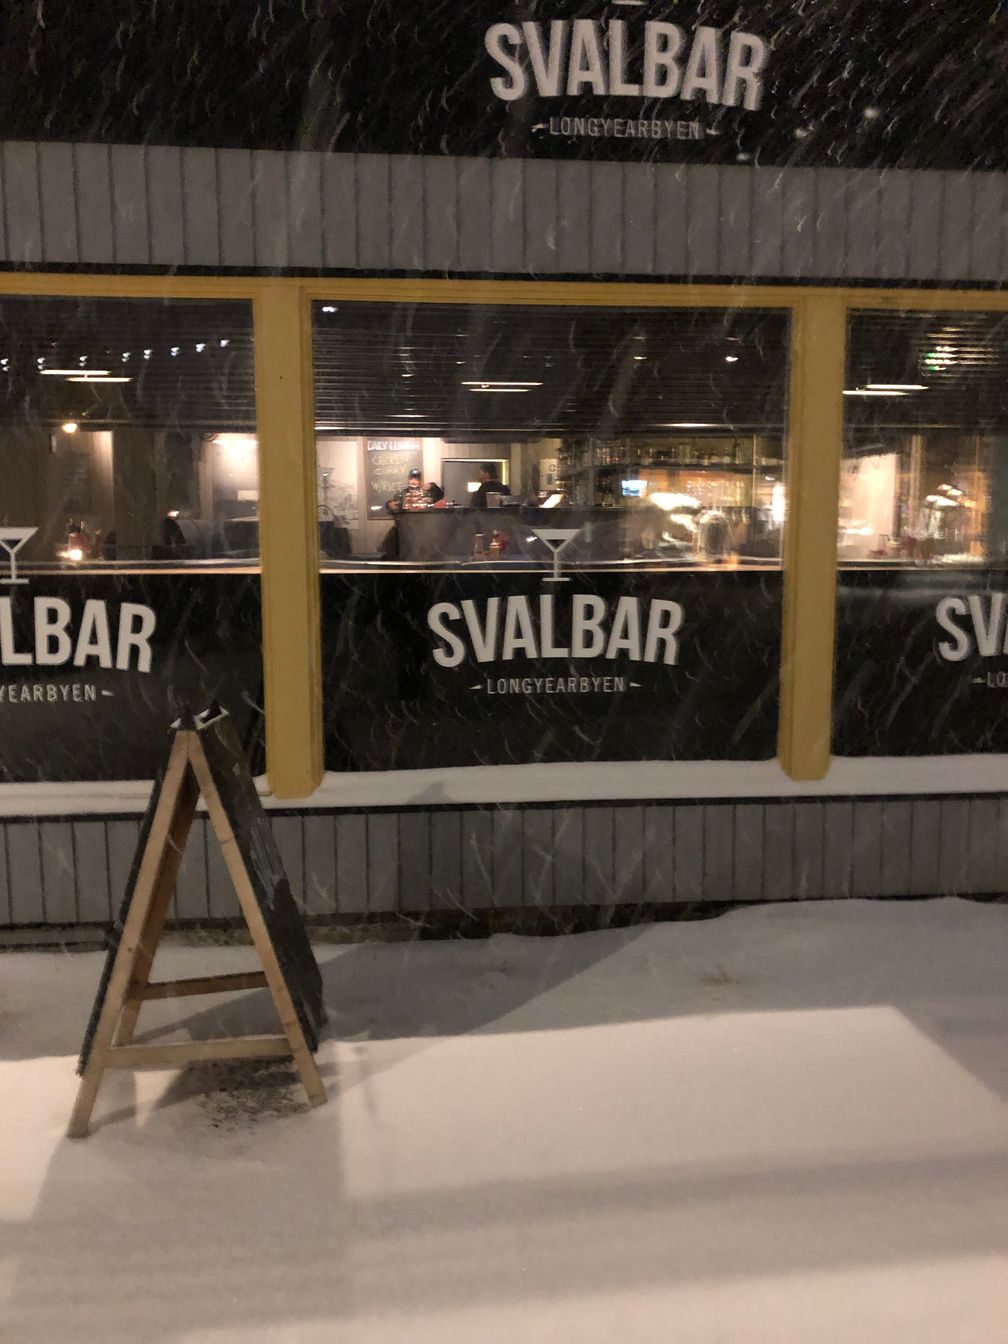 Svalbar, best bar to go when backpacking to Svalbard.